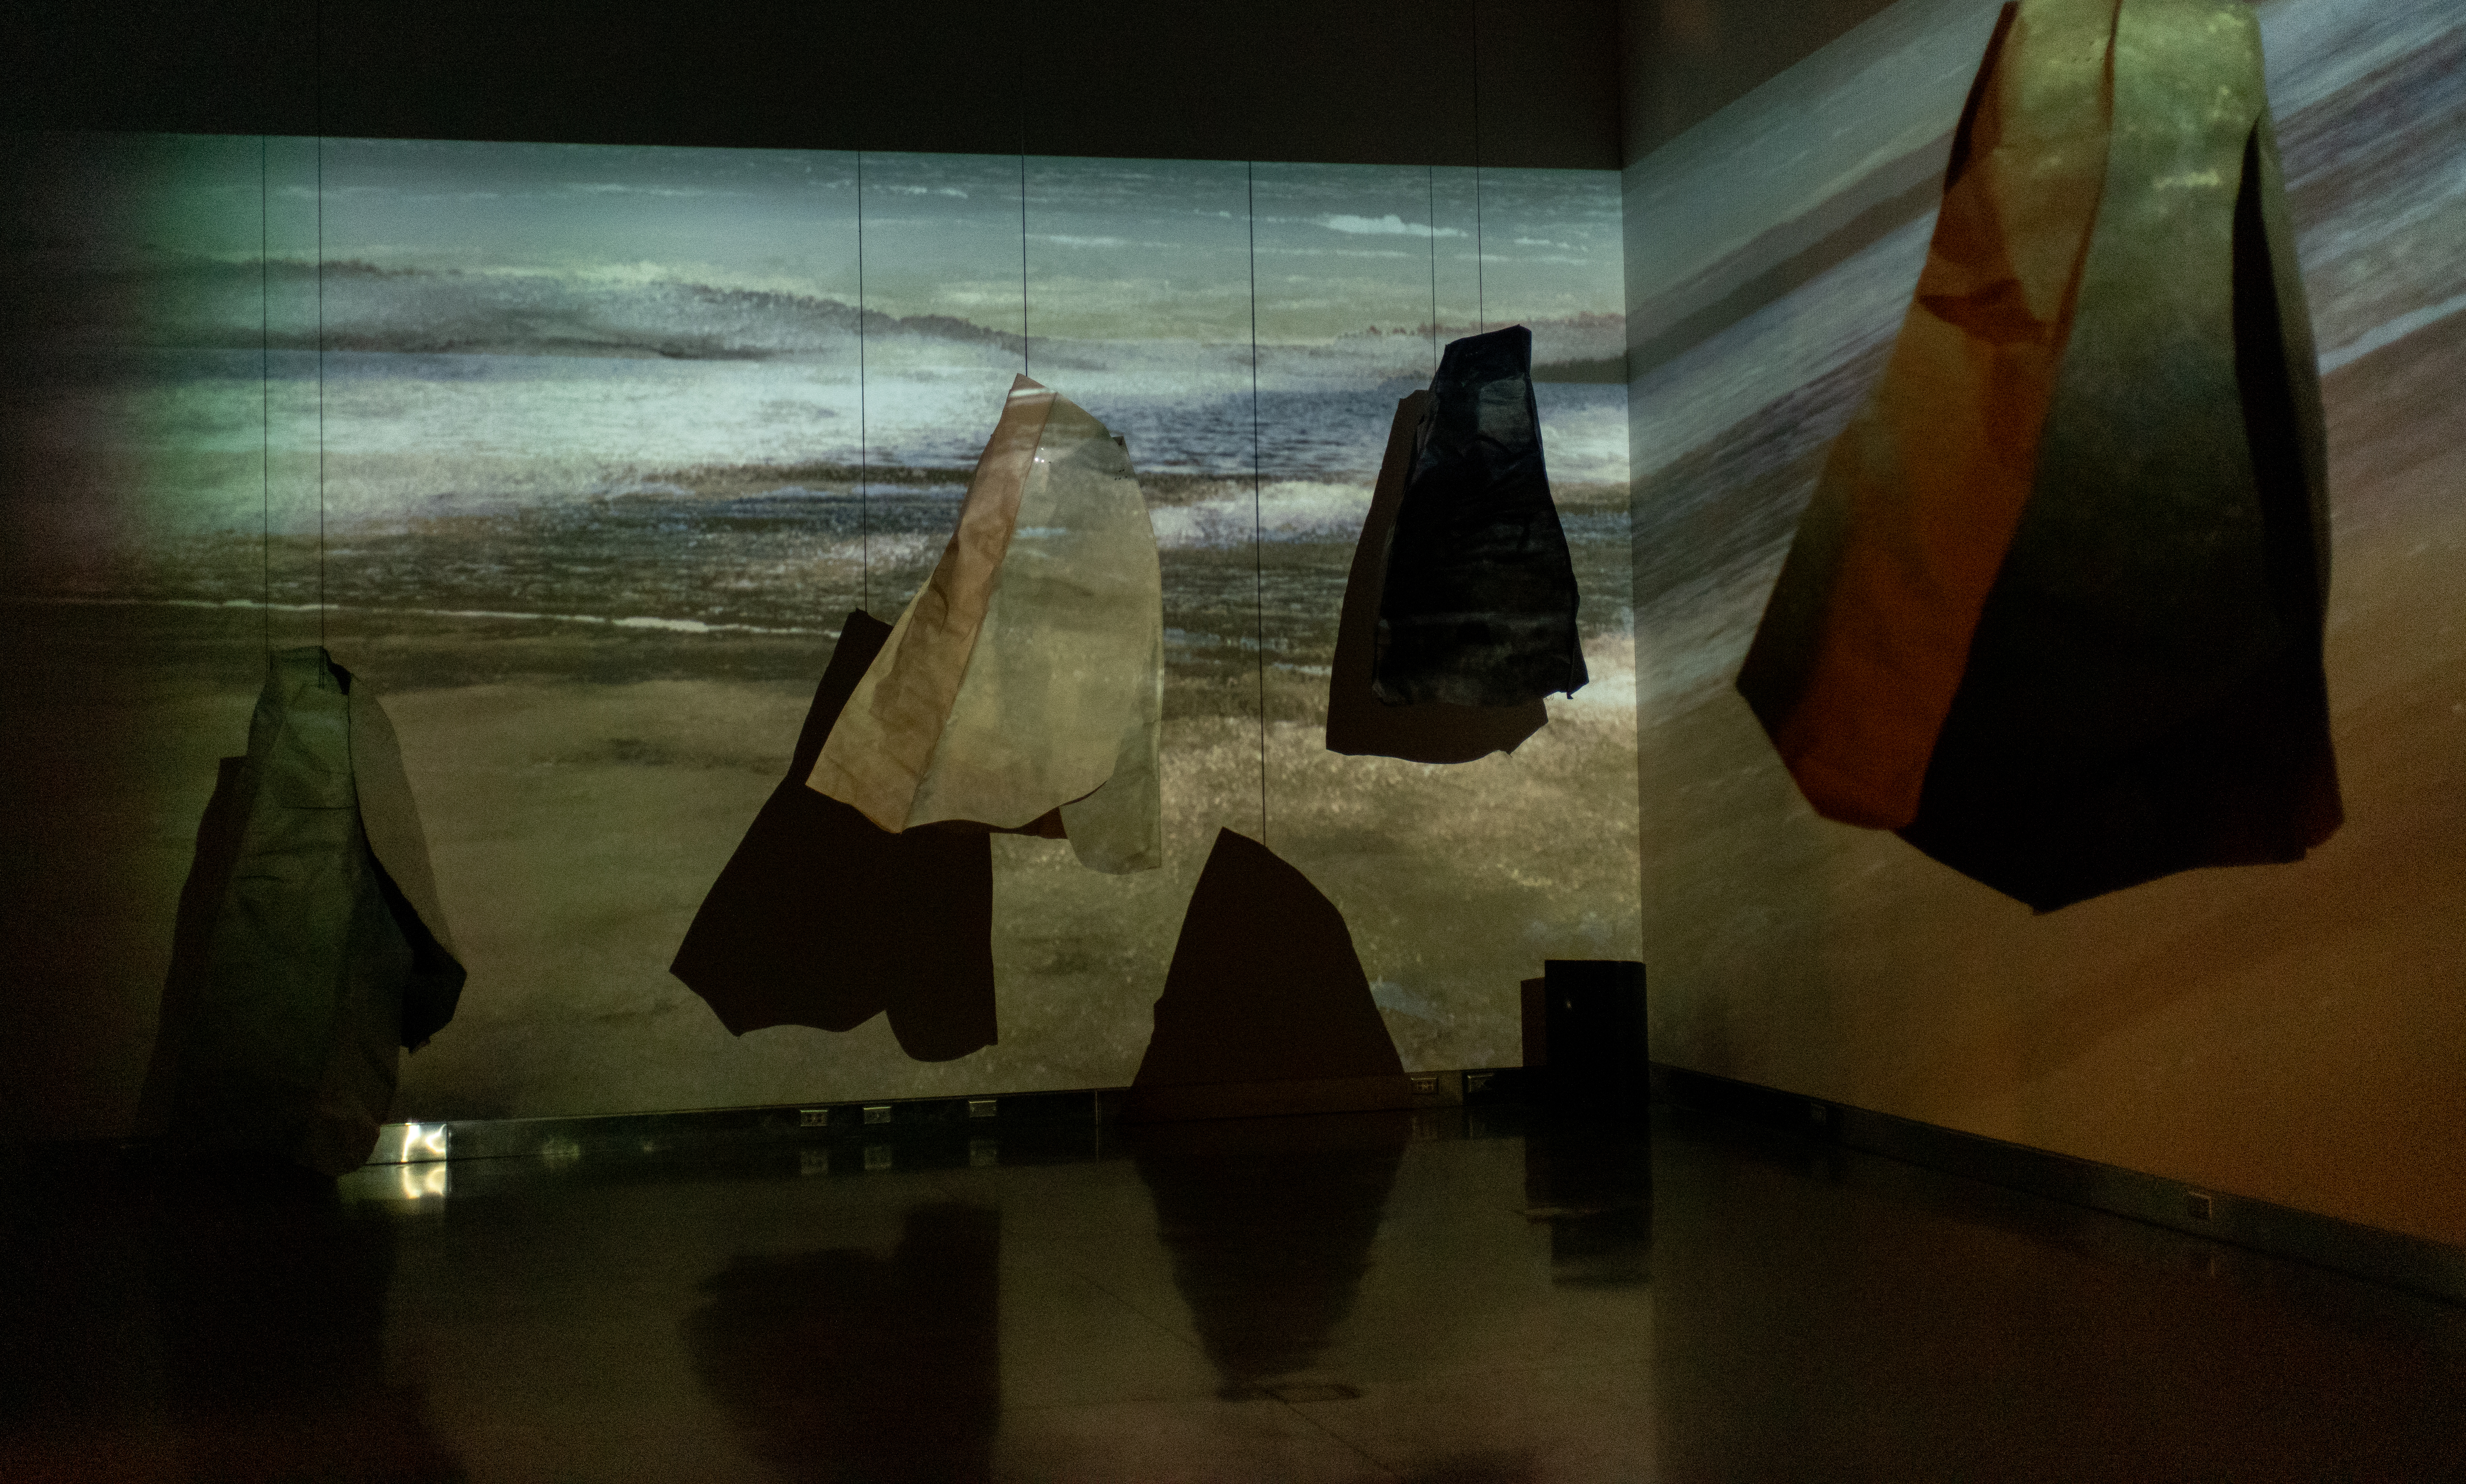 art installation with clothes hanging amid projection of sand and stormy sky